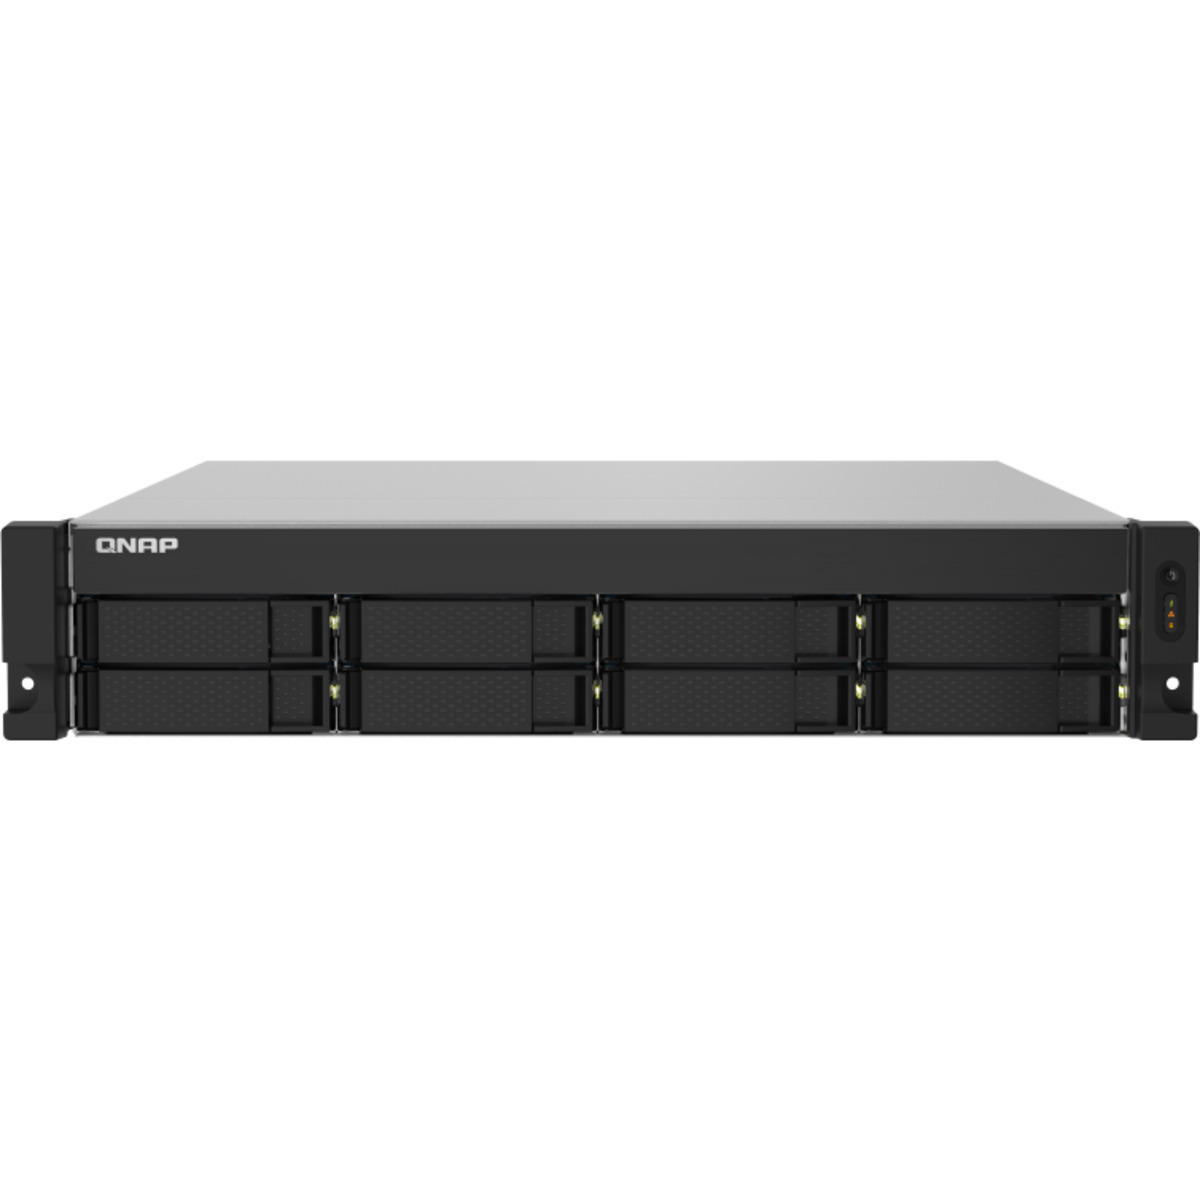 buy QNAP TS-832PXU-RP 64tb RackMount NAS - Network Attached Storage Device 8x8000gb Seagate IronWolf Pro ST8000NT001 3.5 7200rpm SATA 6Gb/s HDD NAS Class Drives Installed - Burn-In Tested - ON SALE - FREE RAM UPGRADE - nas headquarters buy network attached storage server device das new raid-5 free shipping usa spring sale TS-832PXU-RP